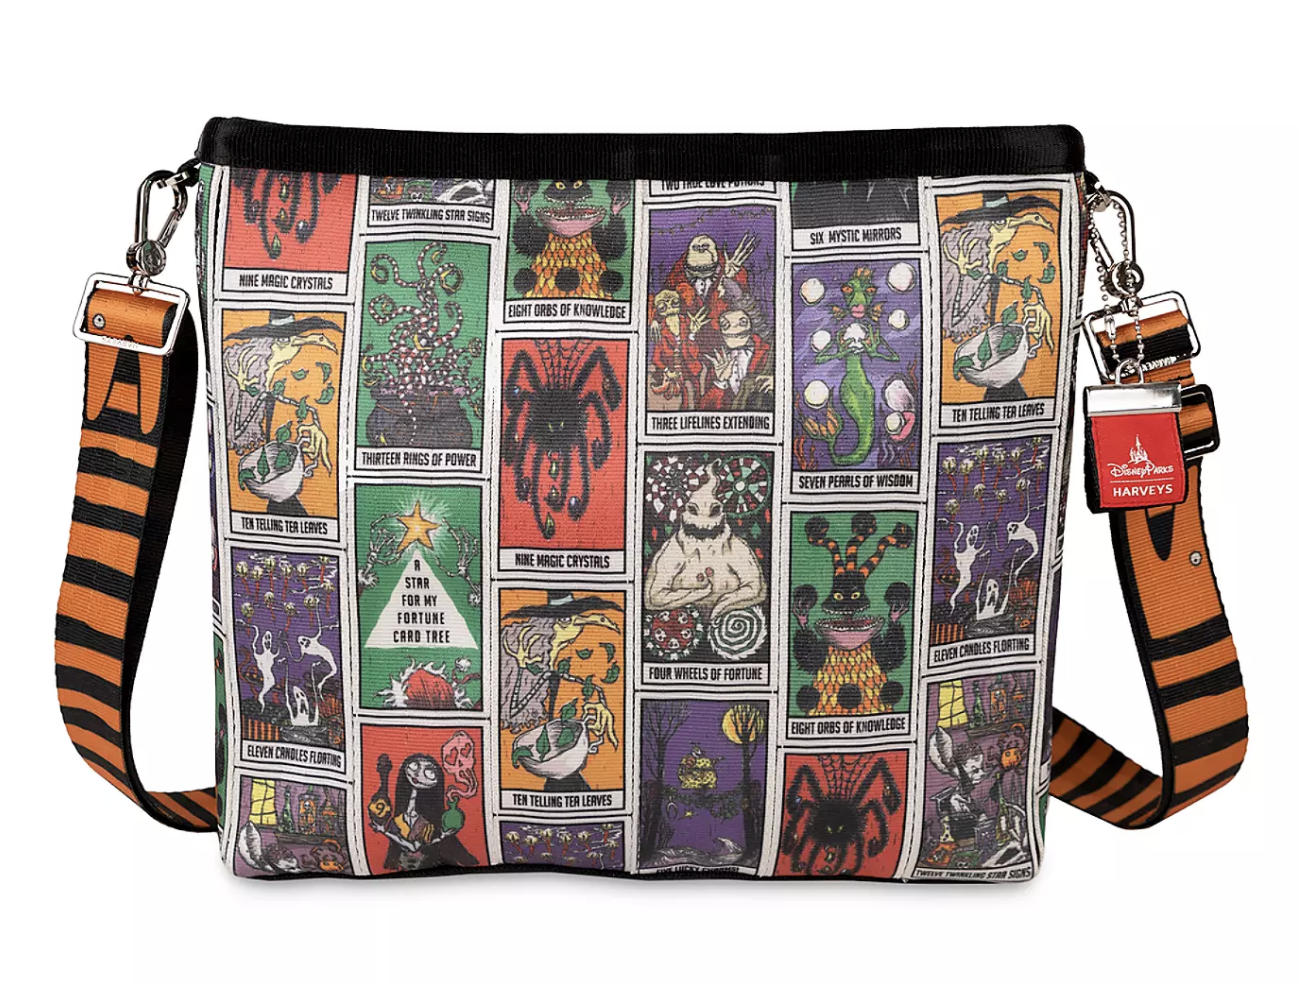 Hurry Harveys X Disney Nightmare Before Christmas Bags Are Selling Out Fast Allears Net